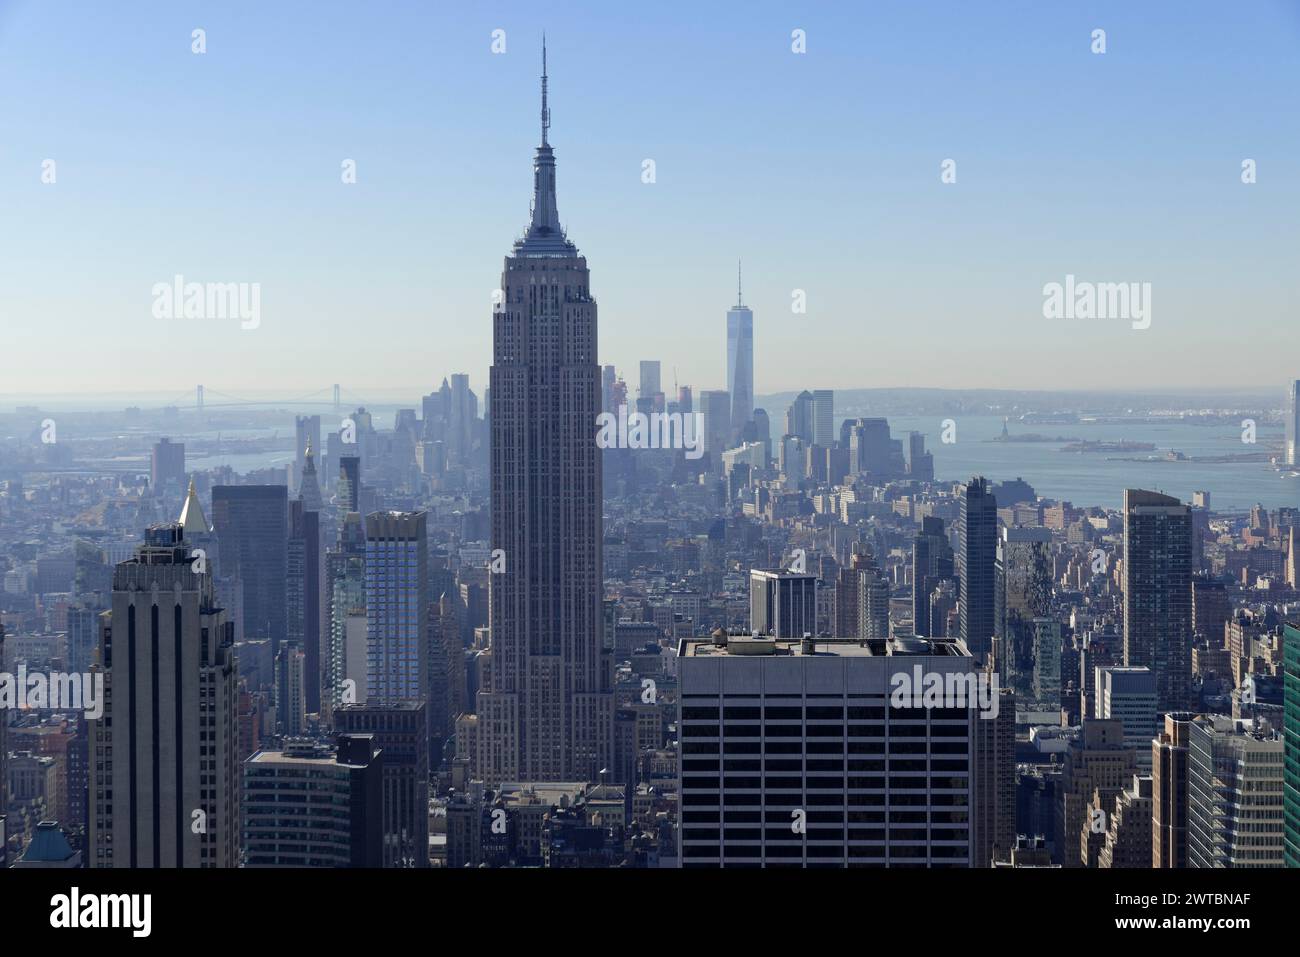 Observation deck of the Rockefeller Center, view of the Empire State Building and surrounding skyscrapers in daylight, Manhattan, New York City, New Stock Photo